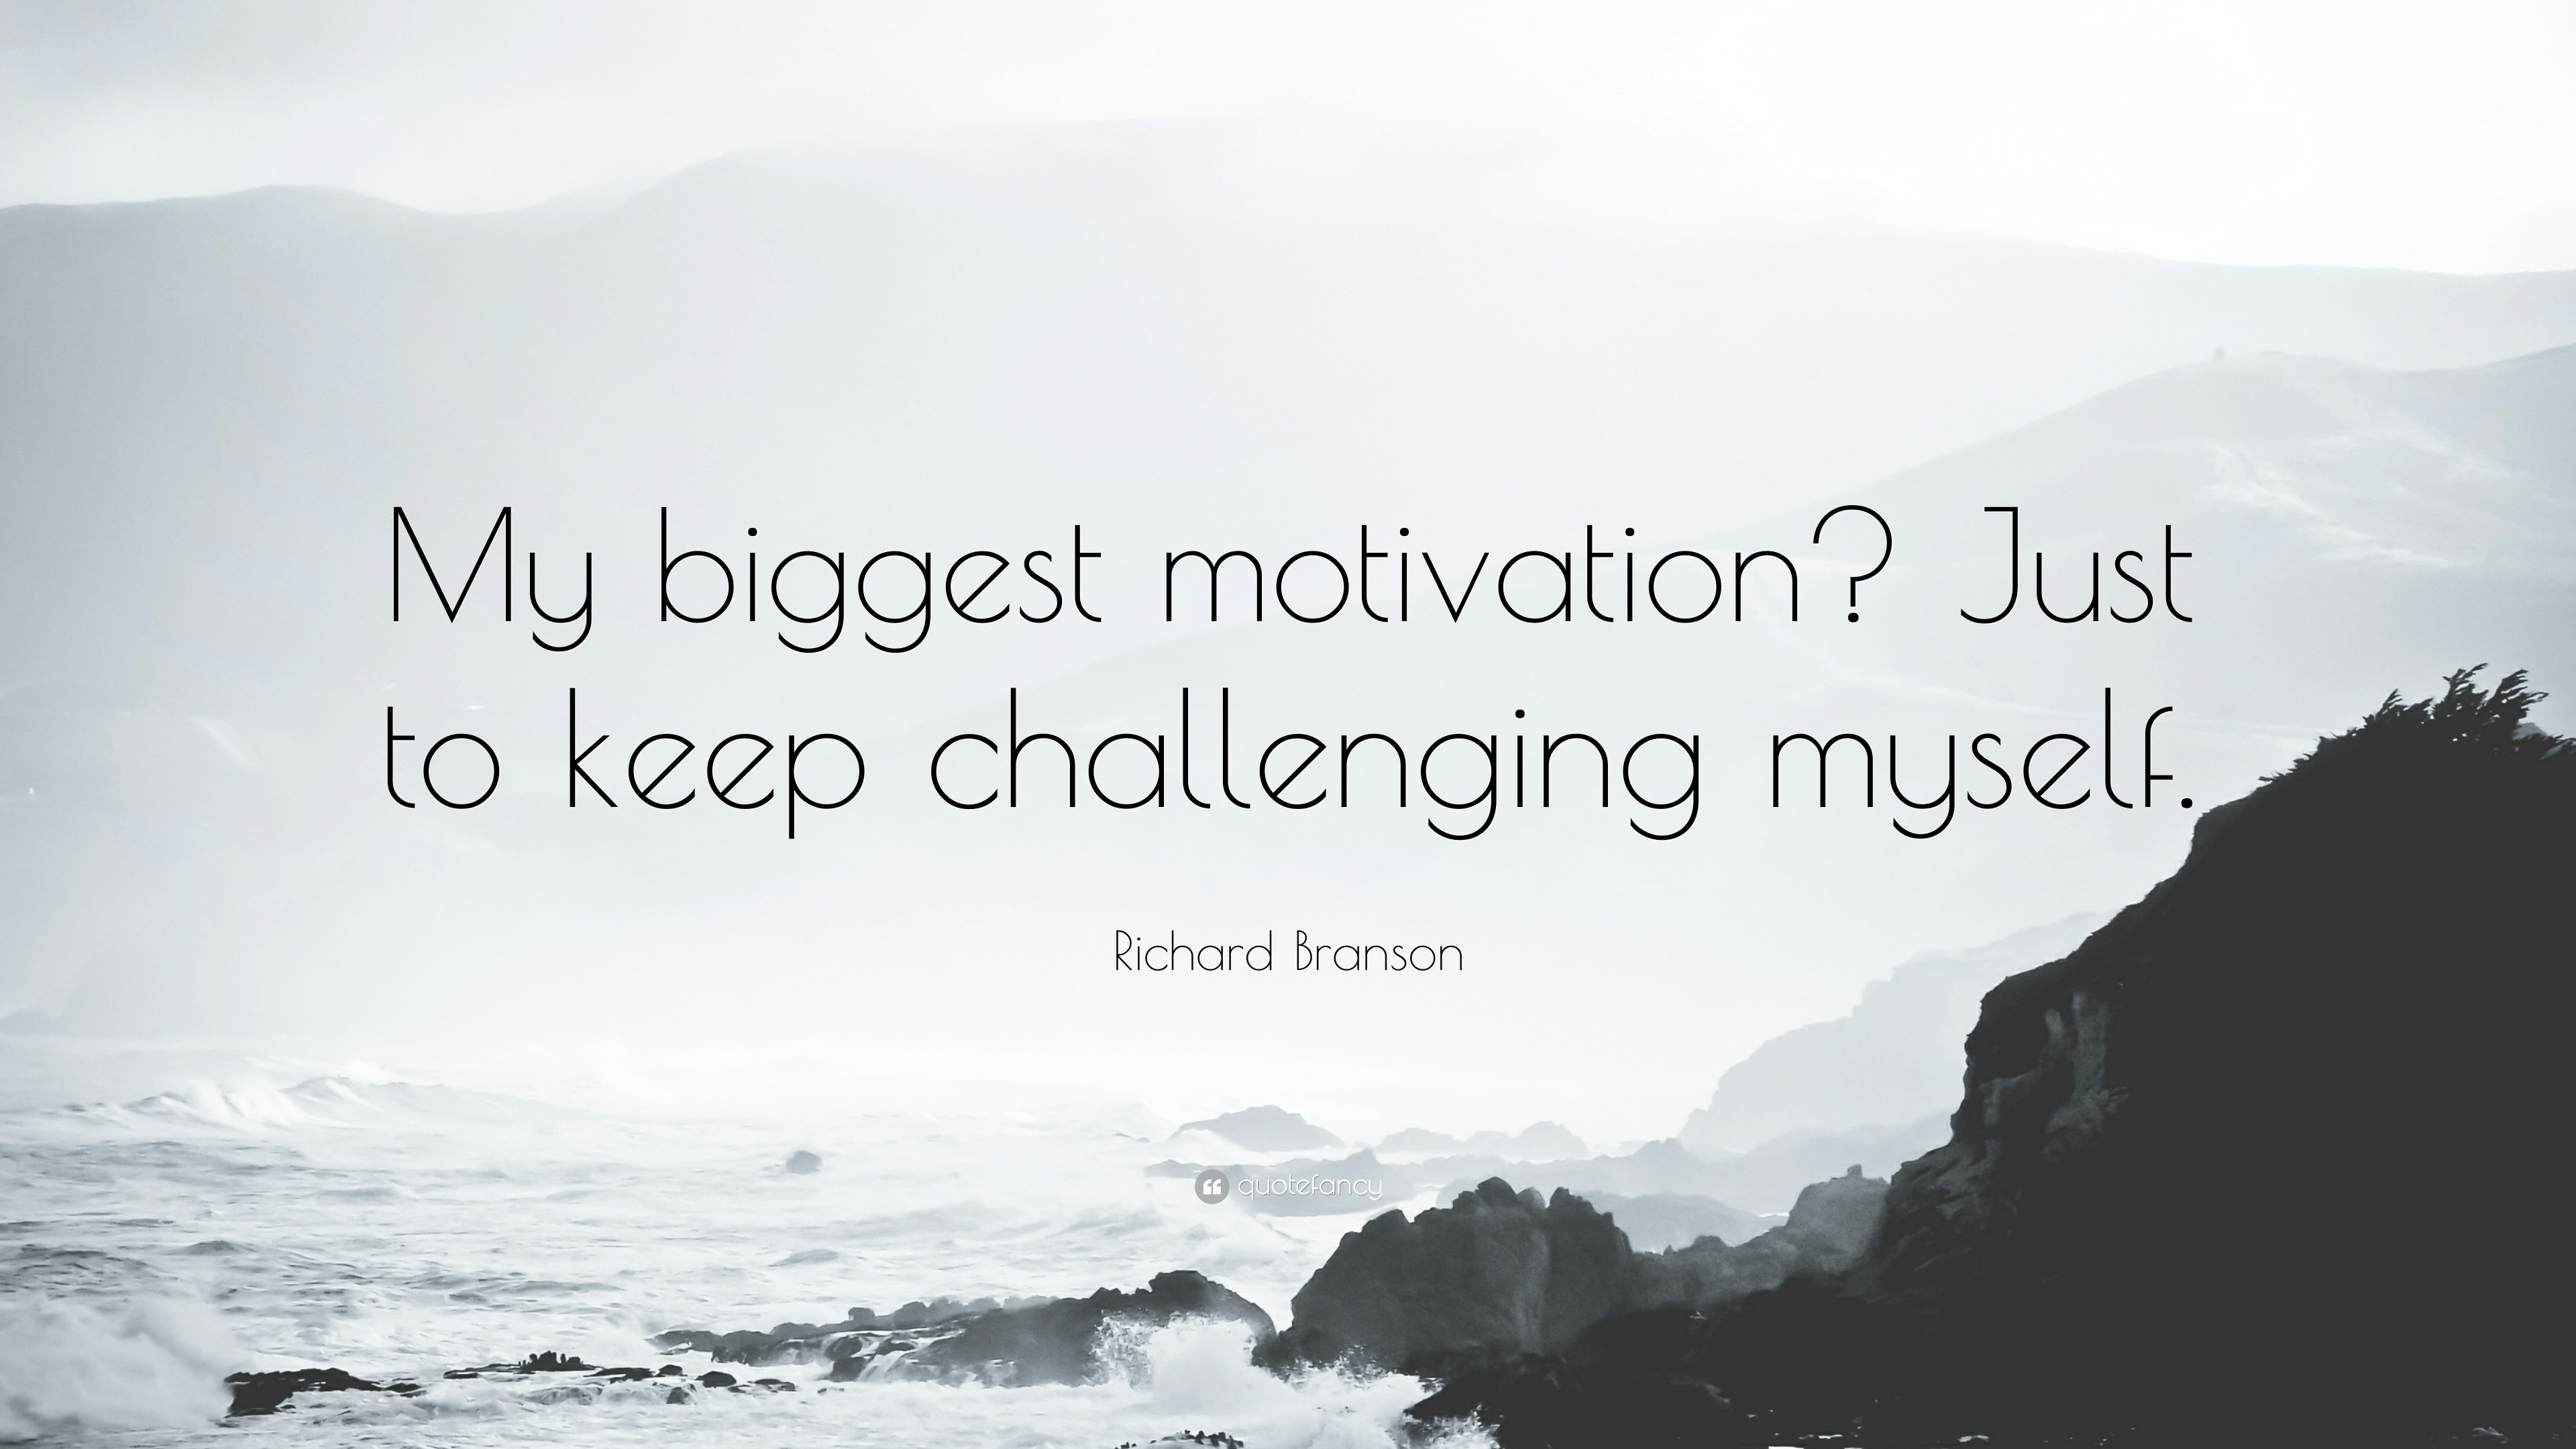 Richard Branson Quote: “My biggest motivation? Just to keep challenging